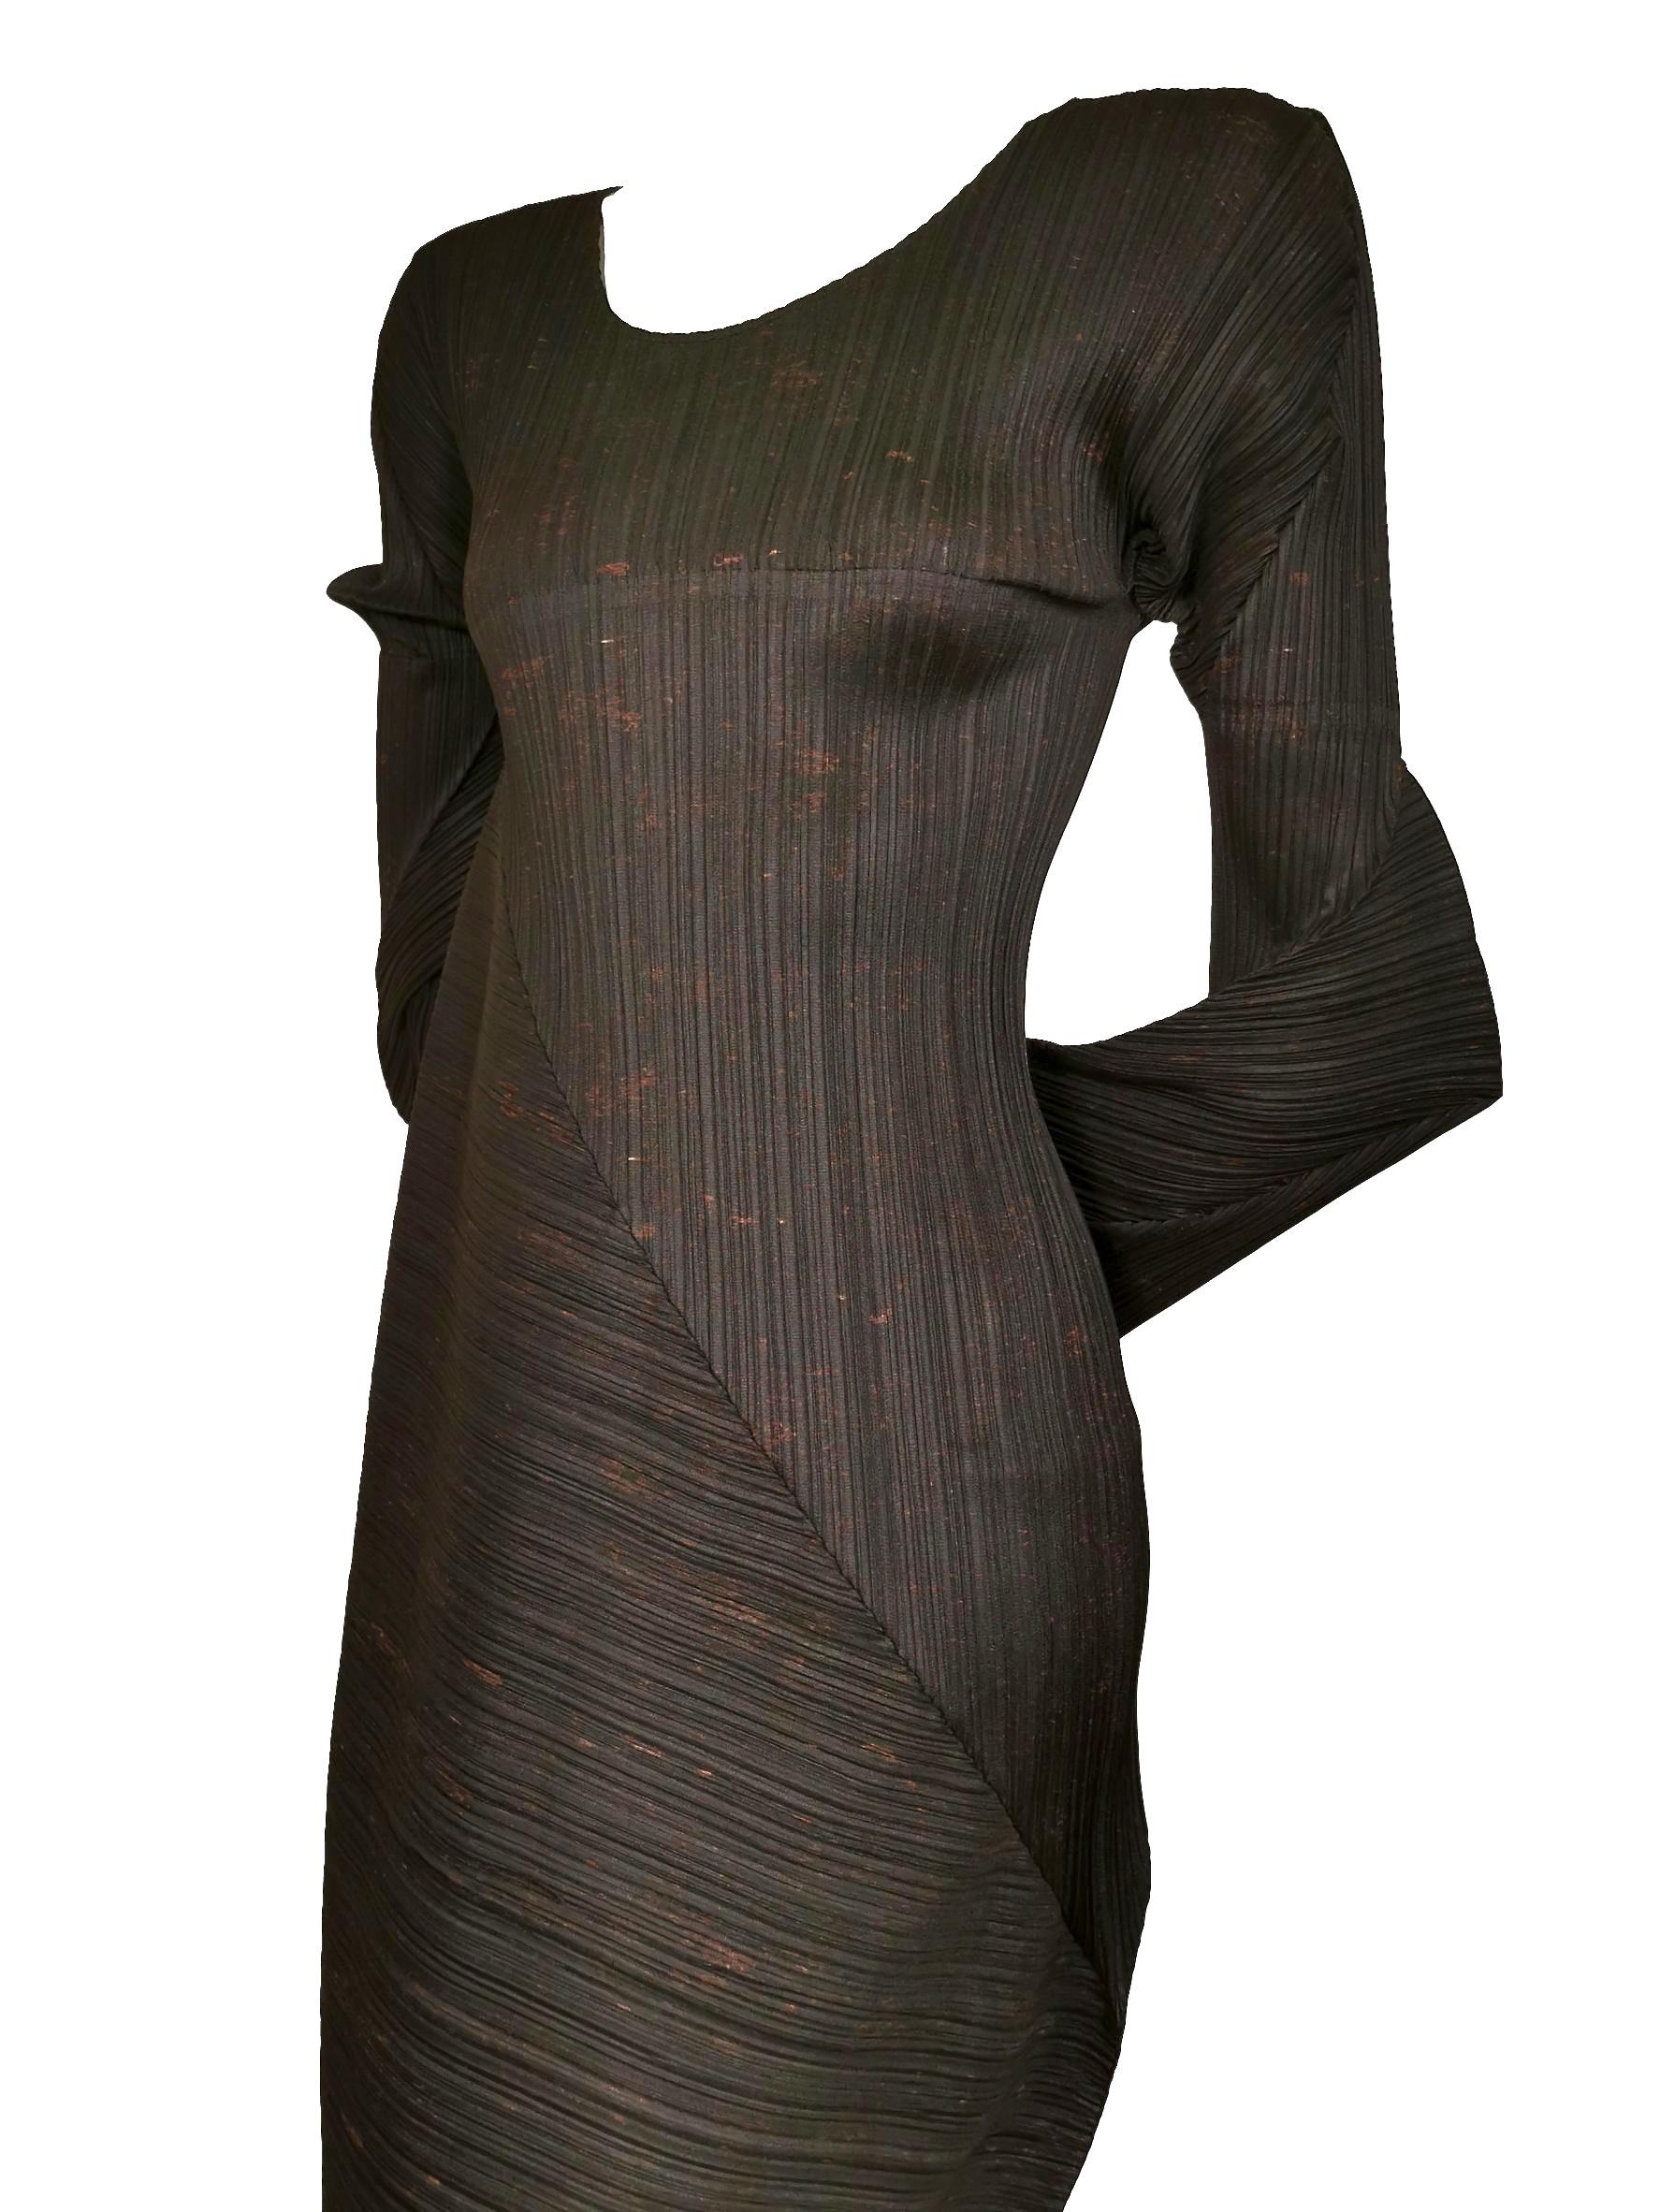 Black Issey Miyake Guest Artist Cai Guo Qiang Series Number 4 Serpentine Dress For Sale